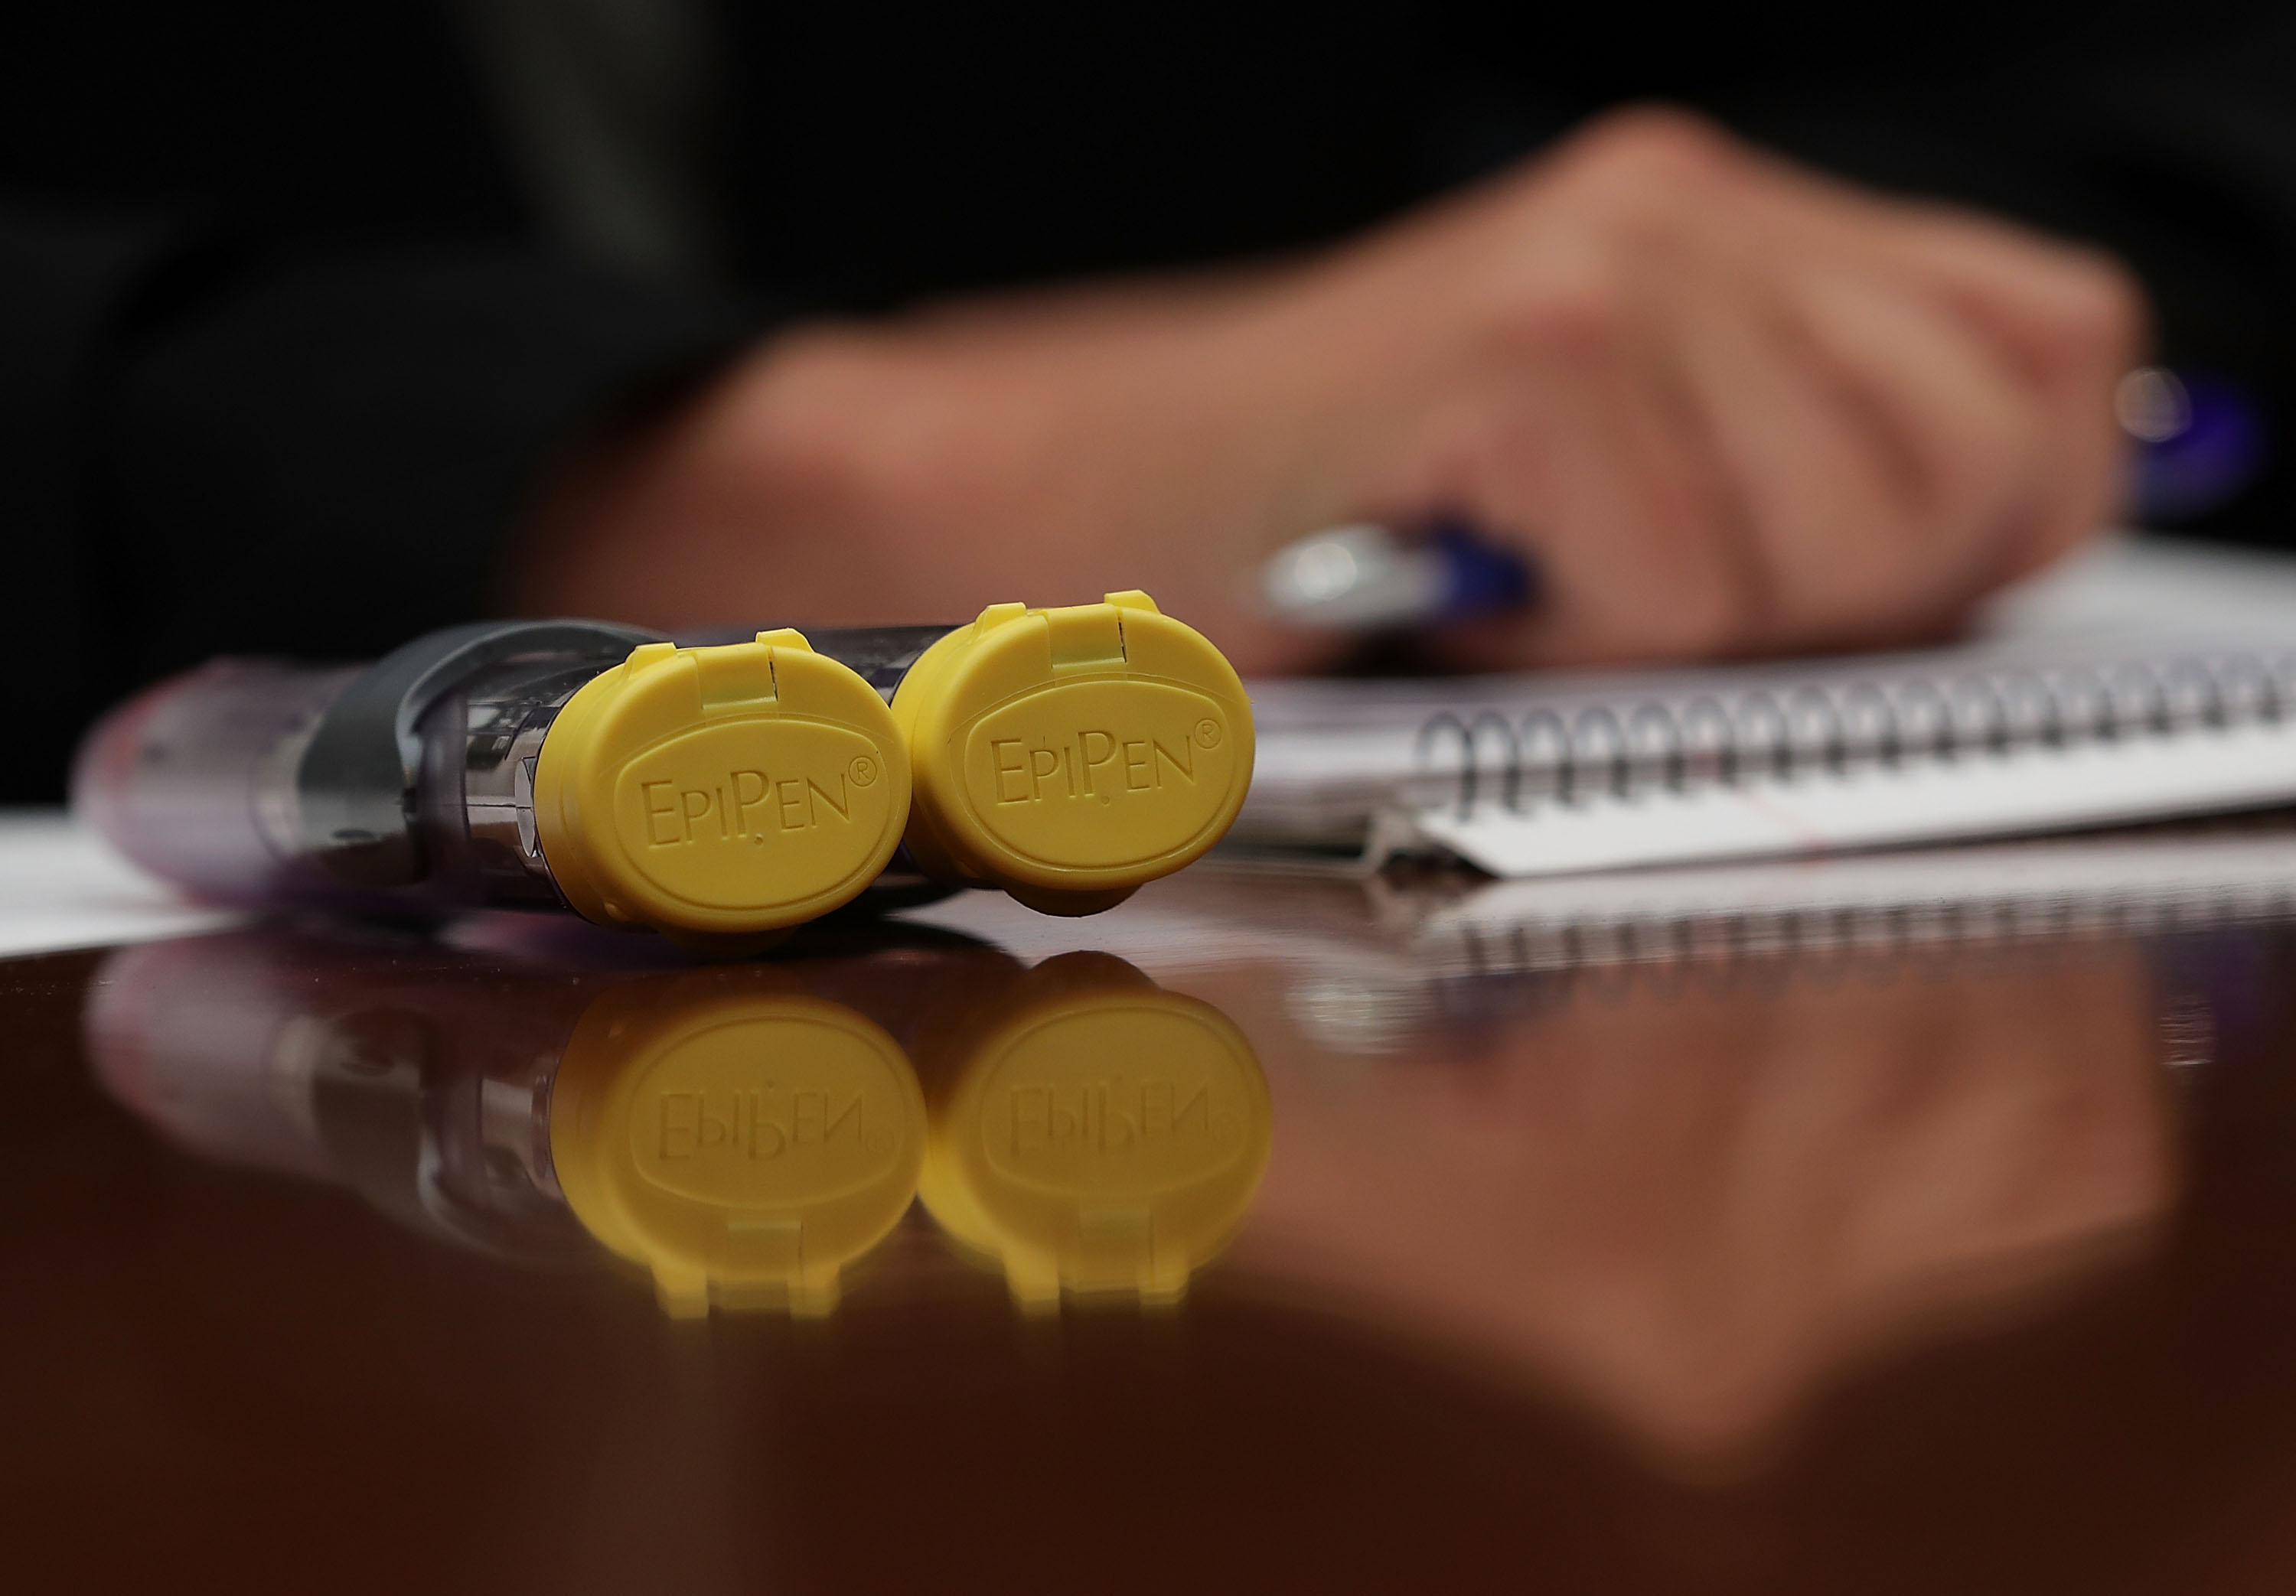 High EpiPen Replacement Costs Add to Pricing Concerns